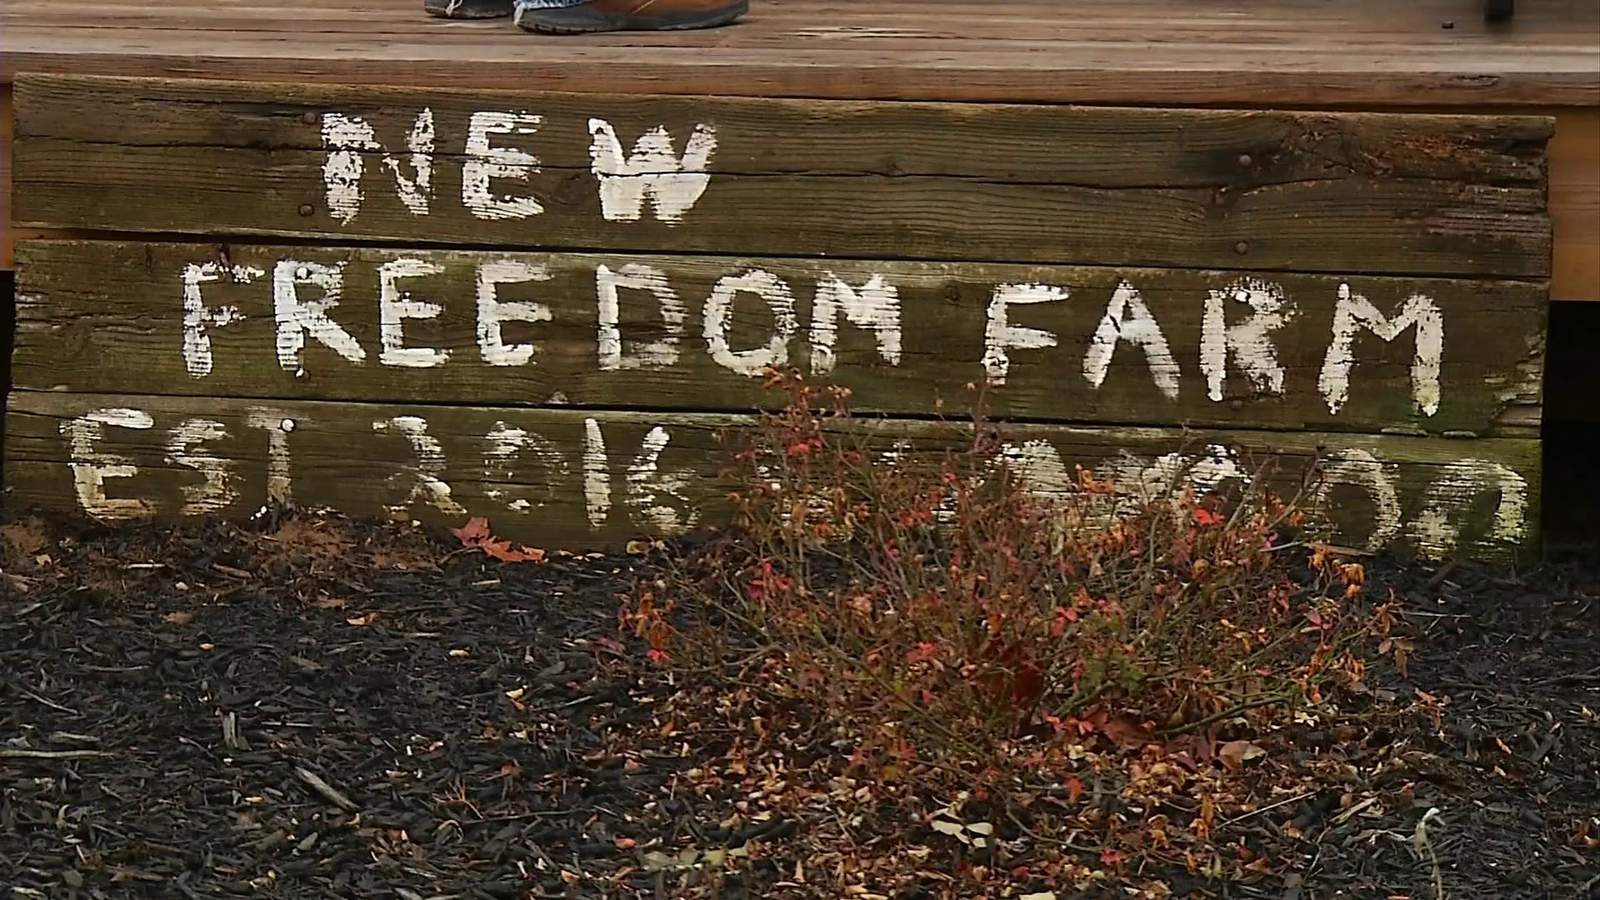 New Freedom Farm expands with community center for veterans in need